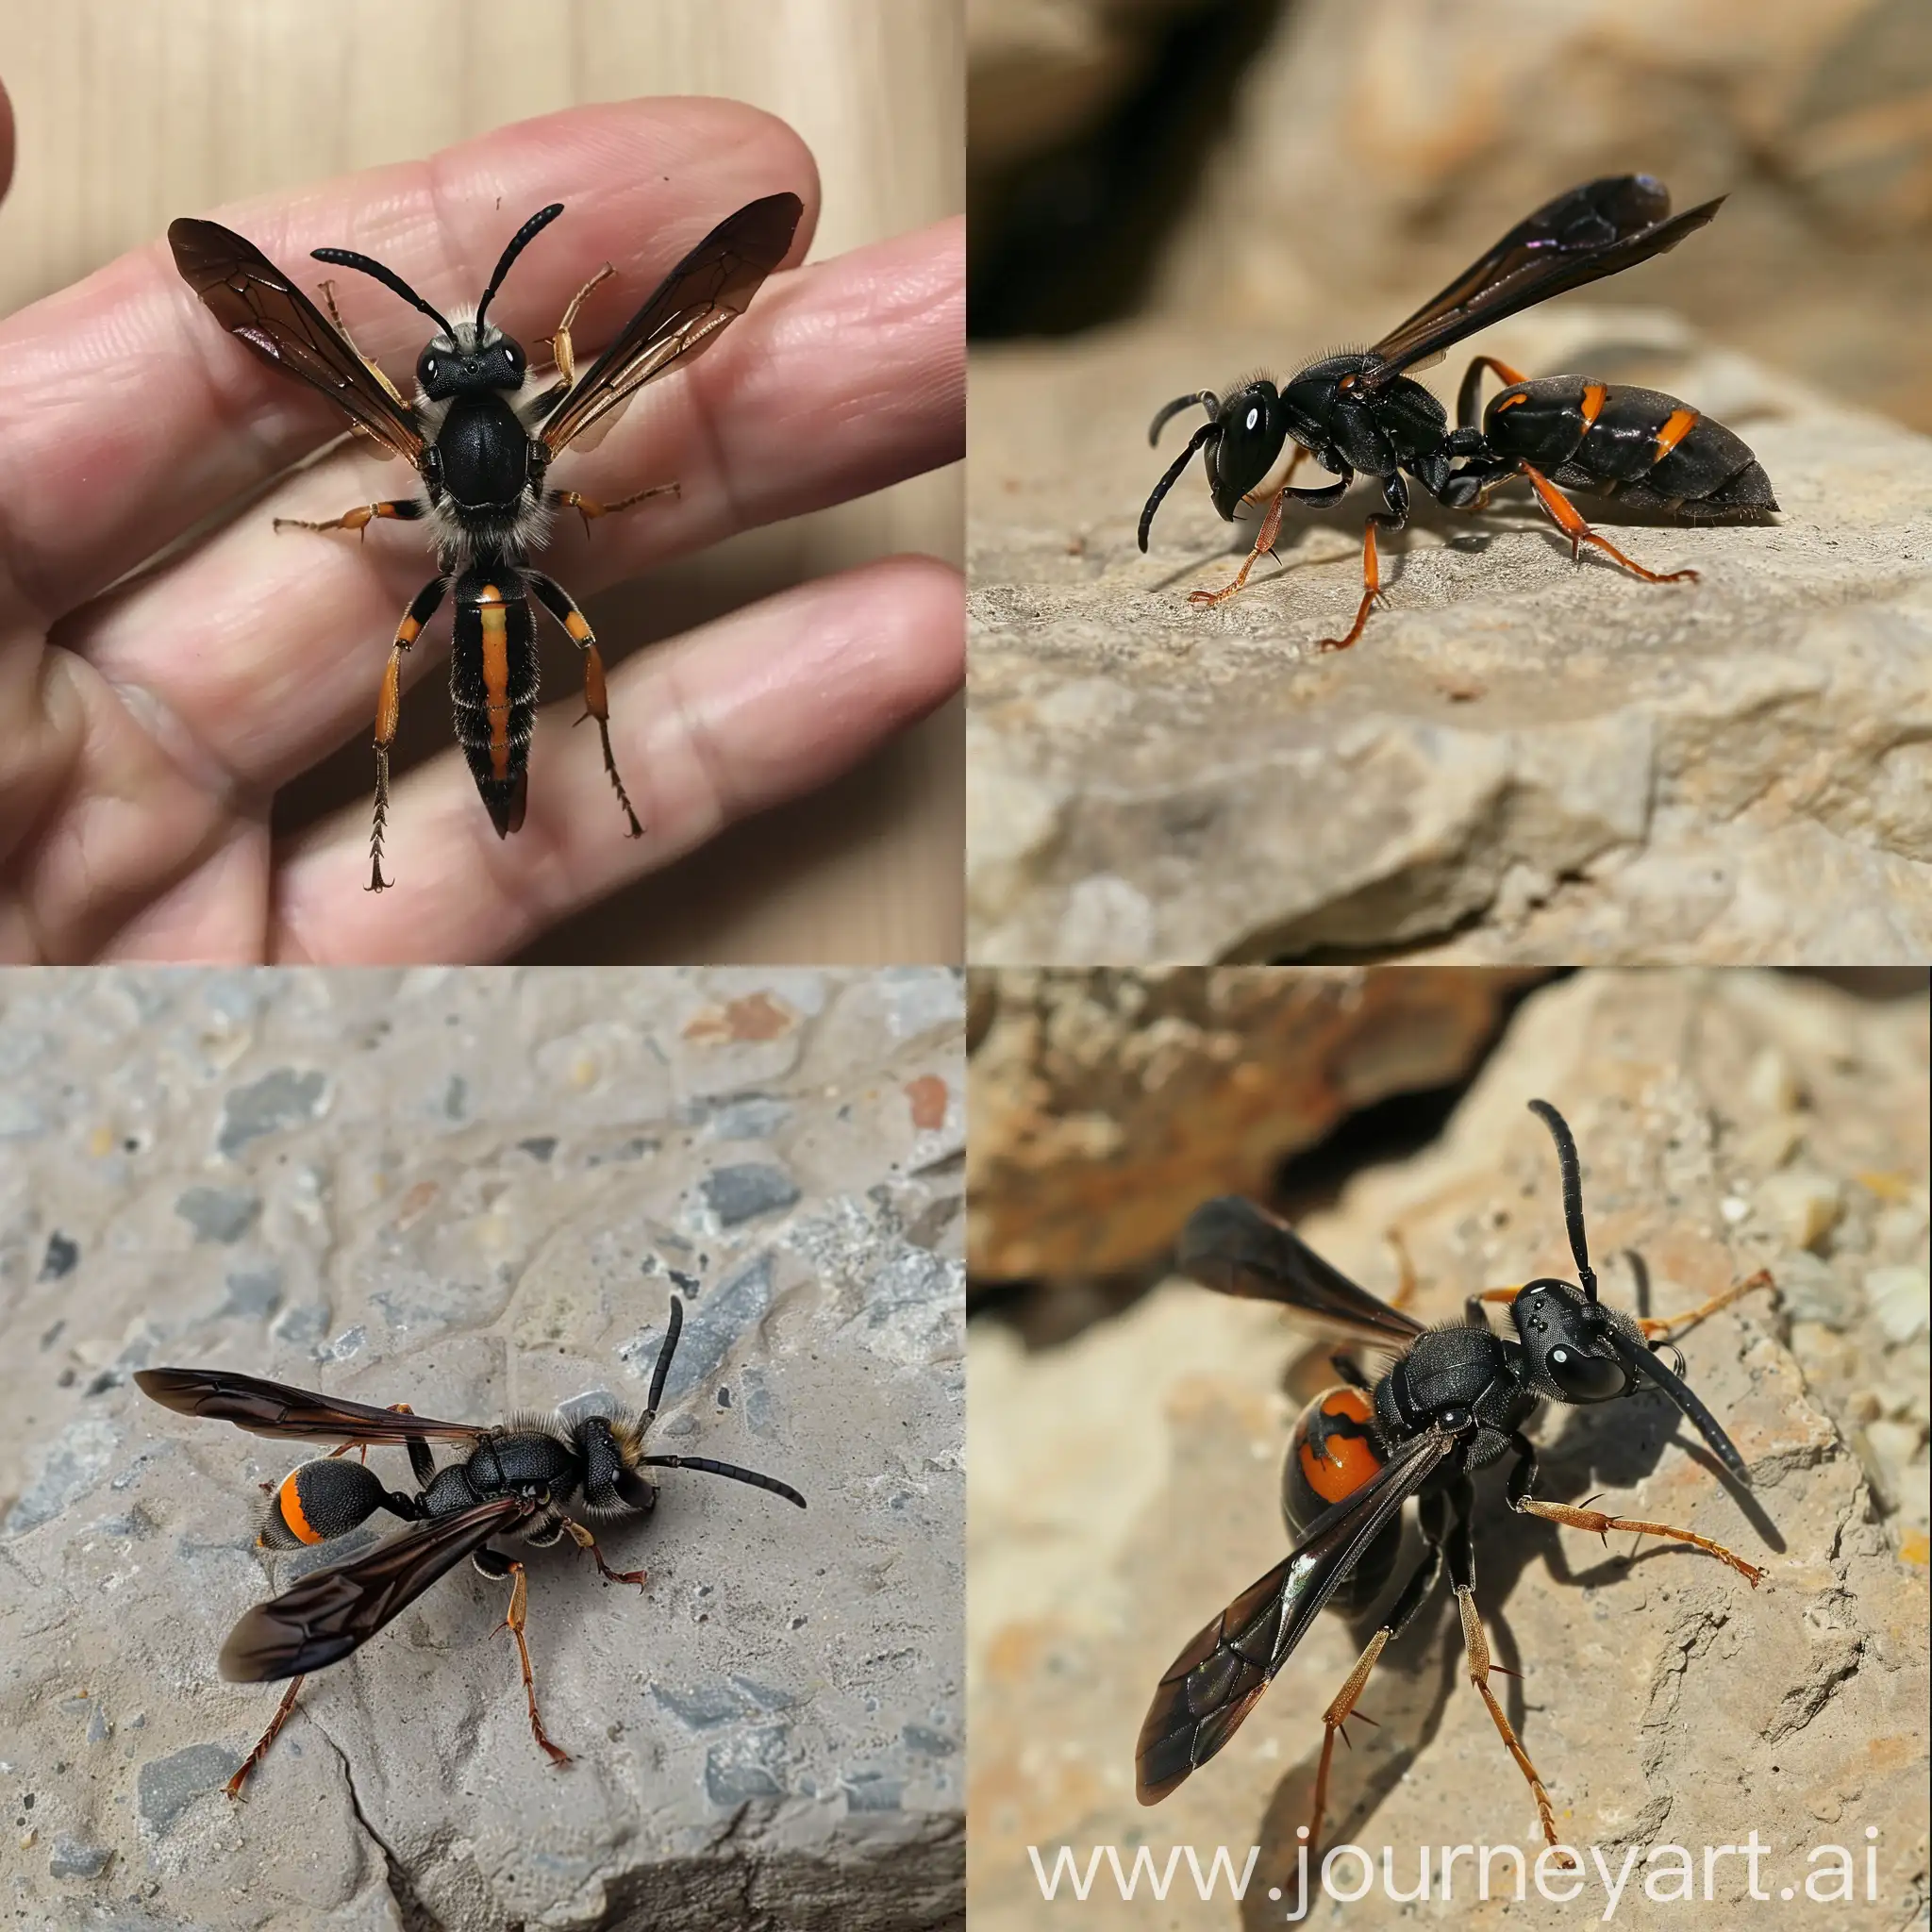 a little black wasp the size of a firefly with orange stripes down its size and black not-fucky wings